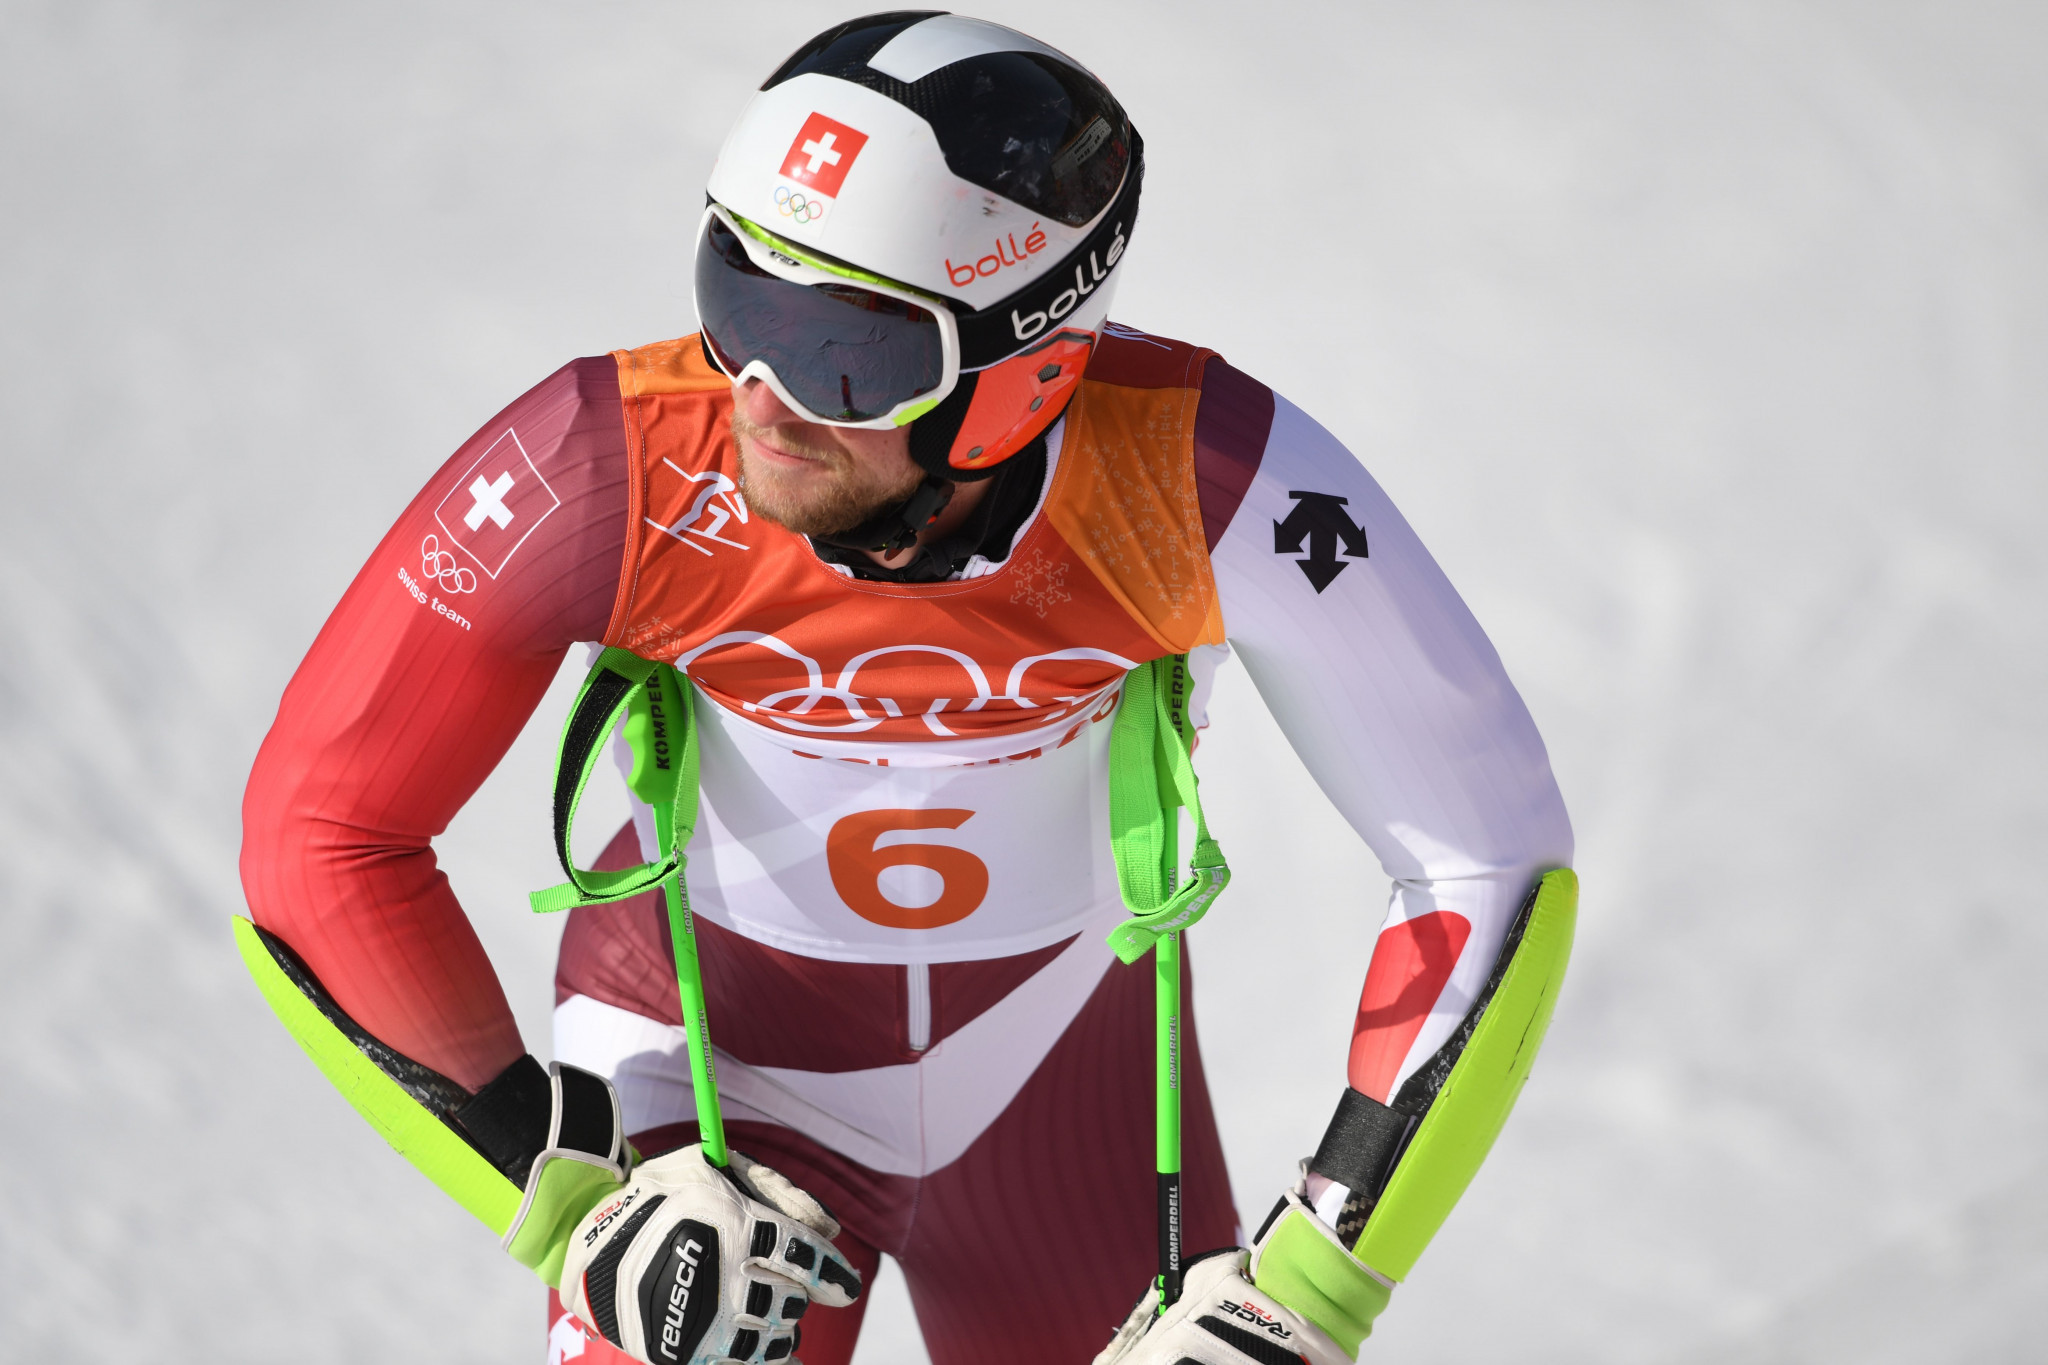 Murisier to miss entire Alpine skiing season after third serious knee injury of career